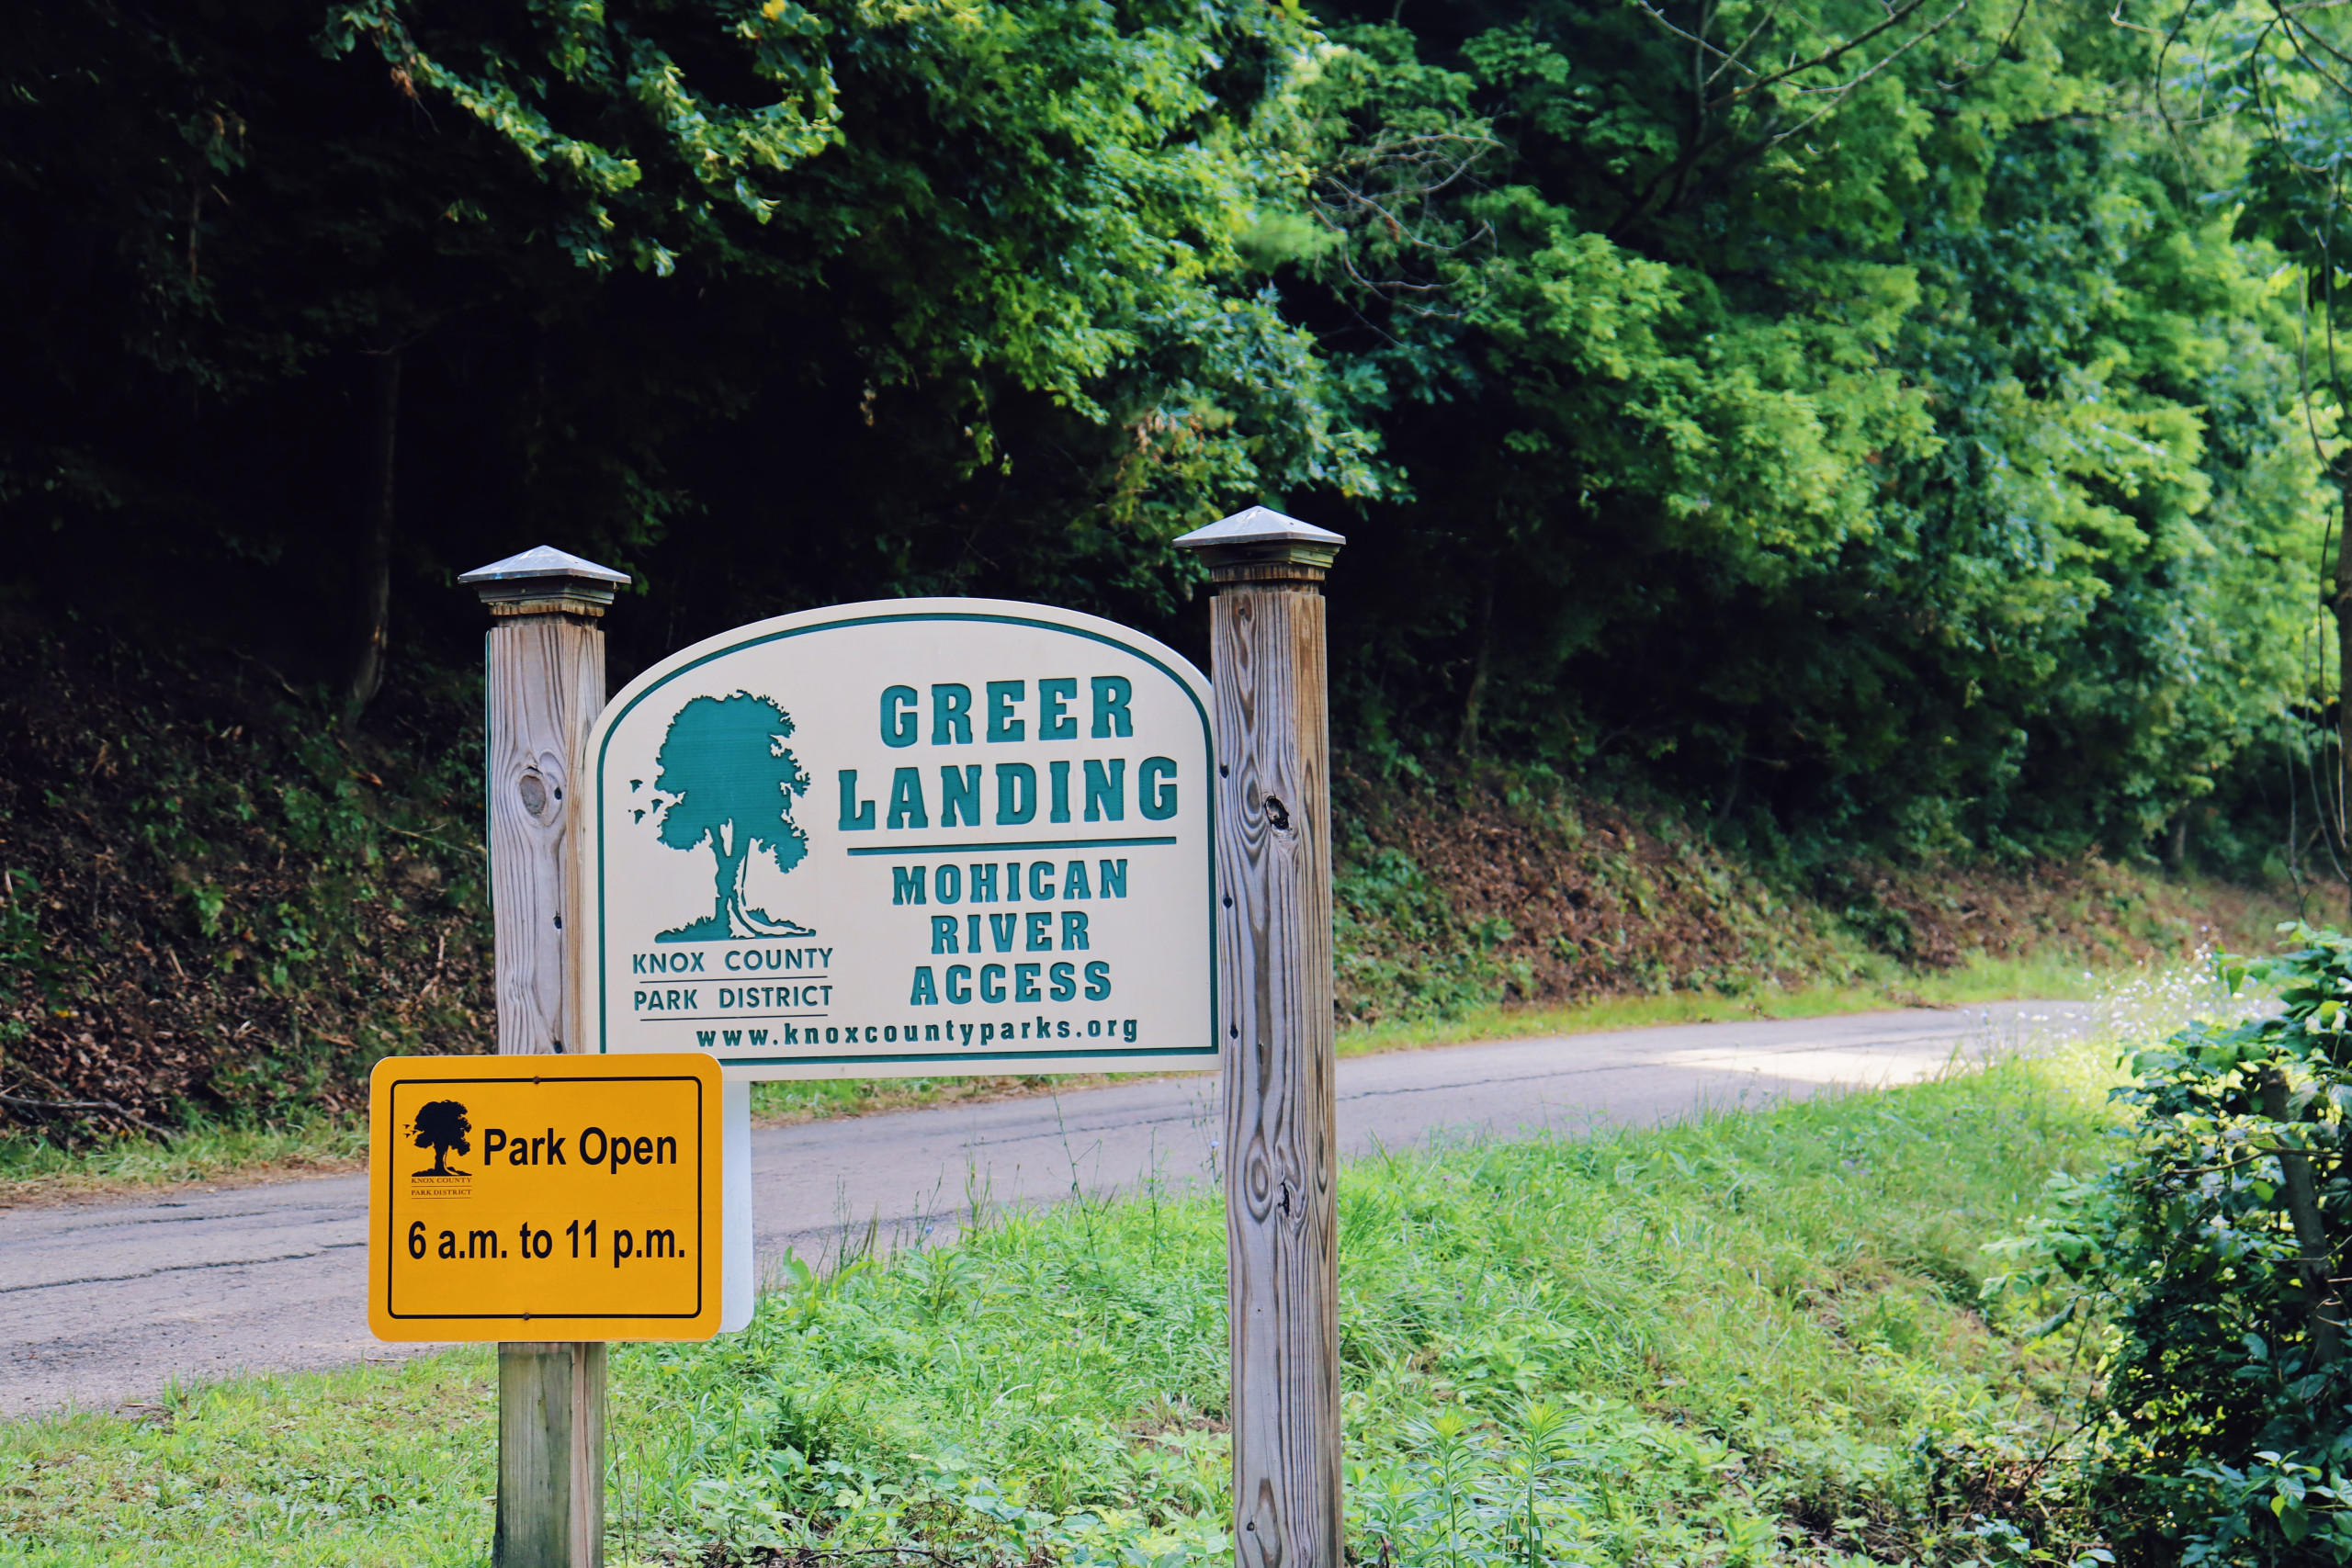 Greer Landing (Mohican River Access)